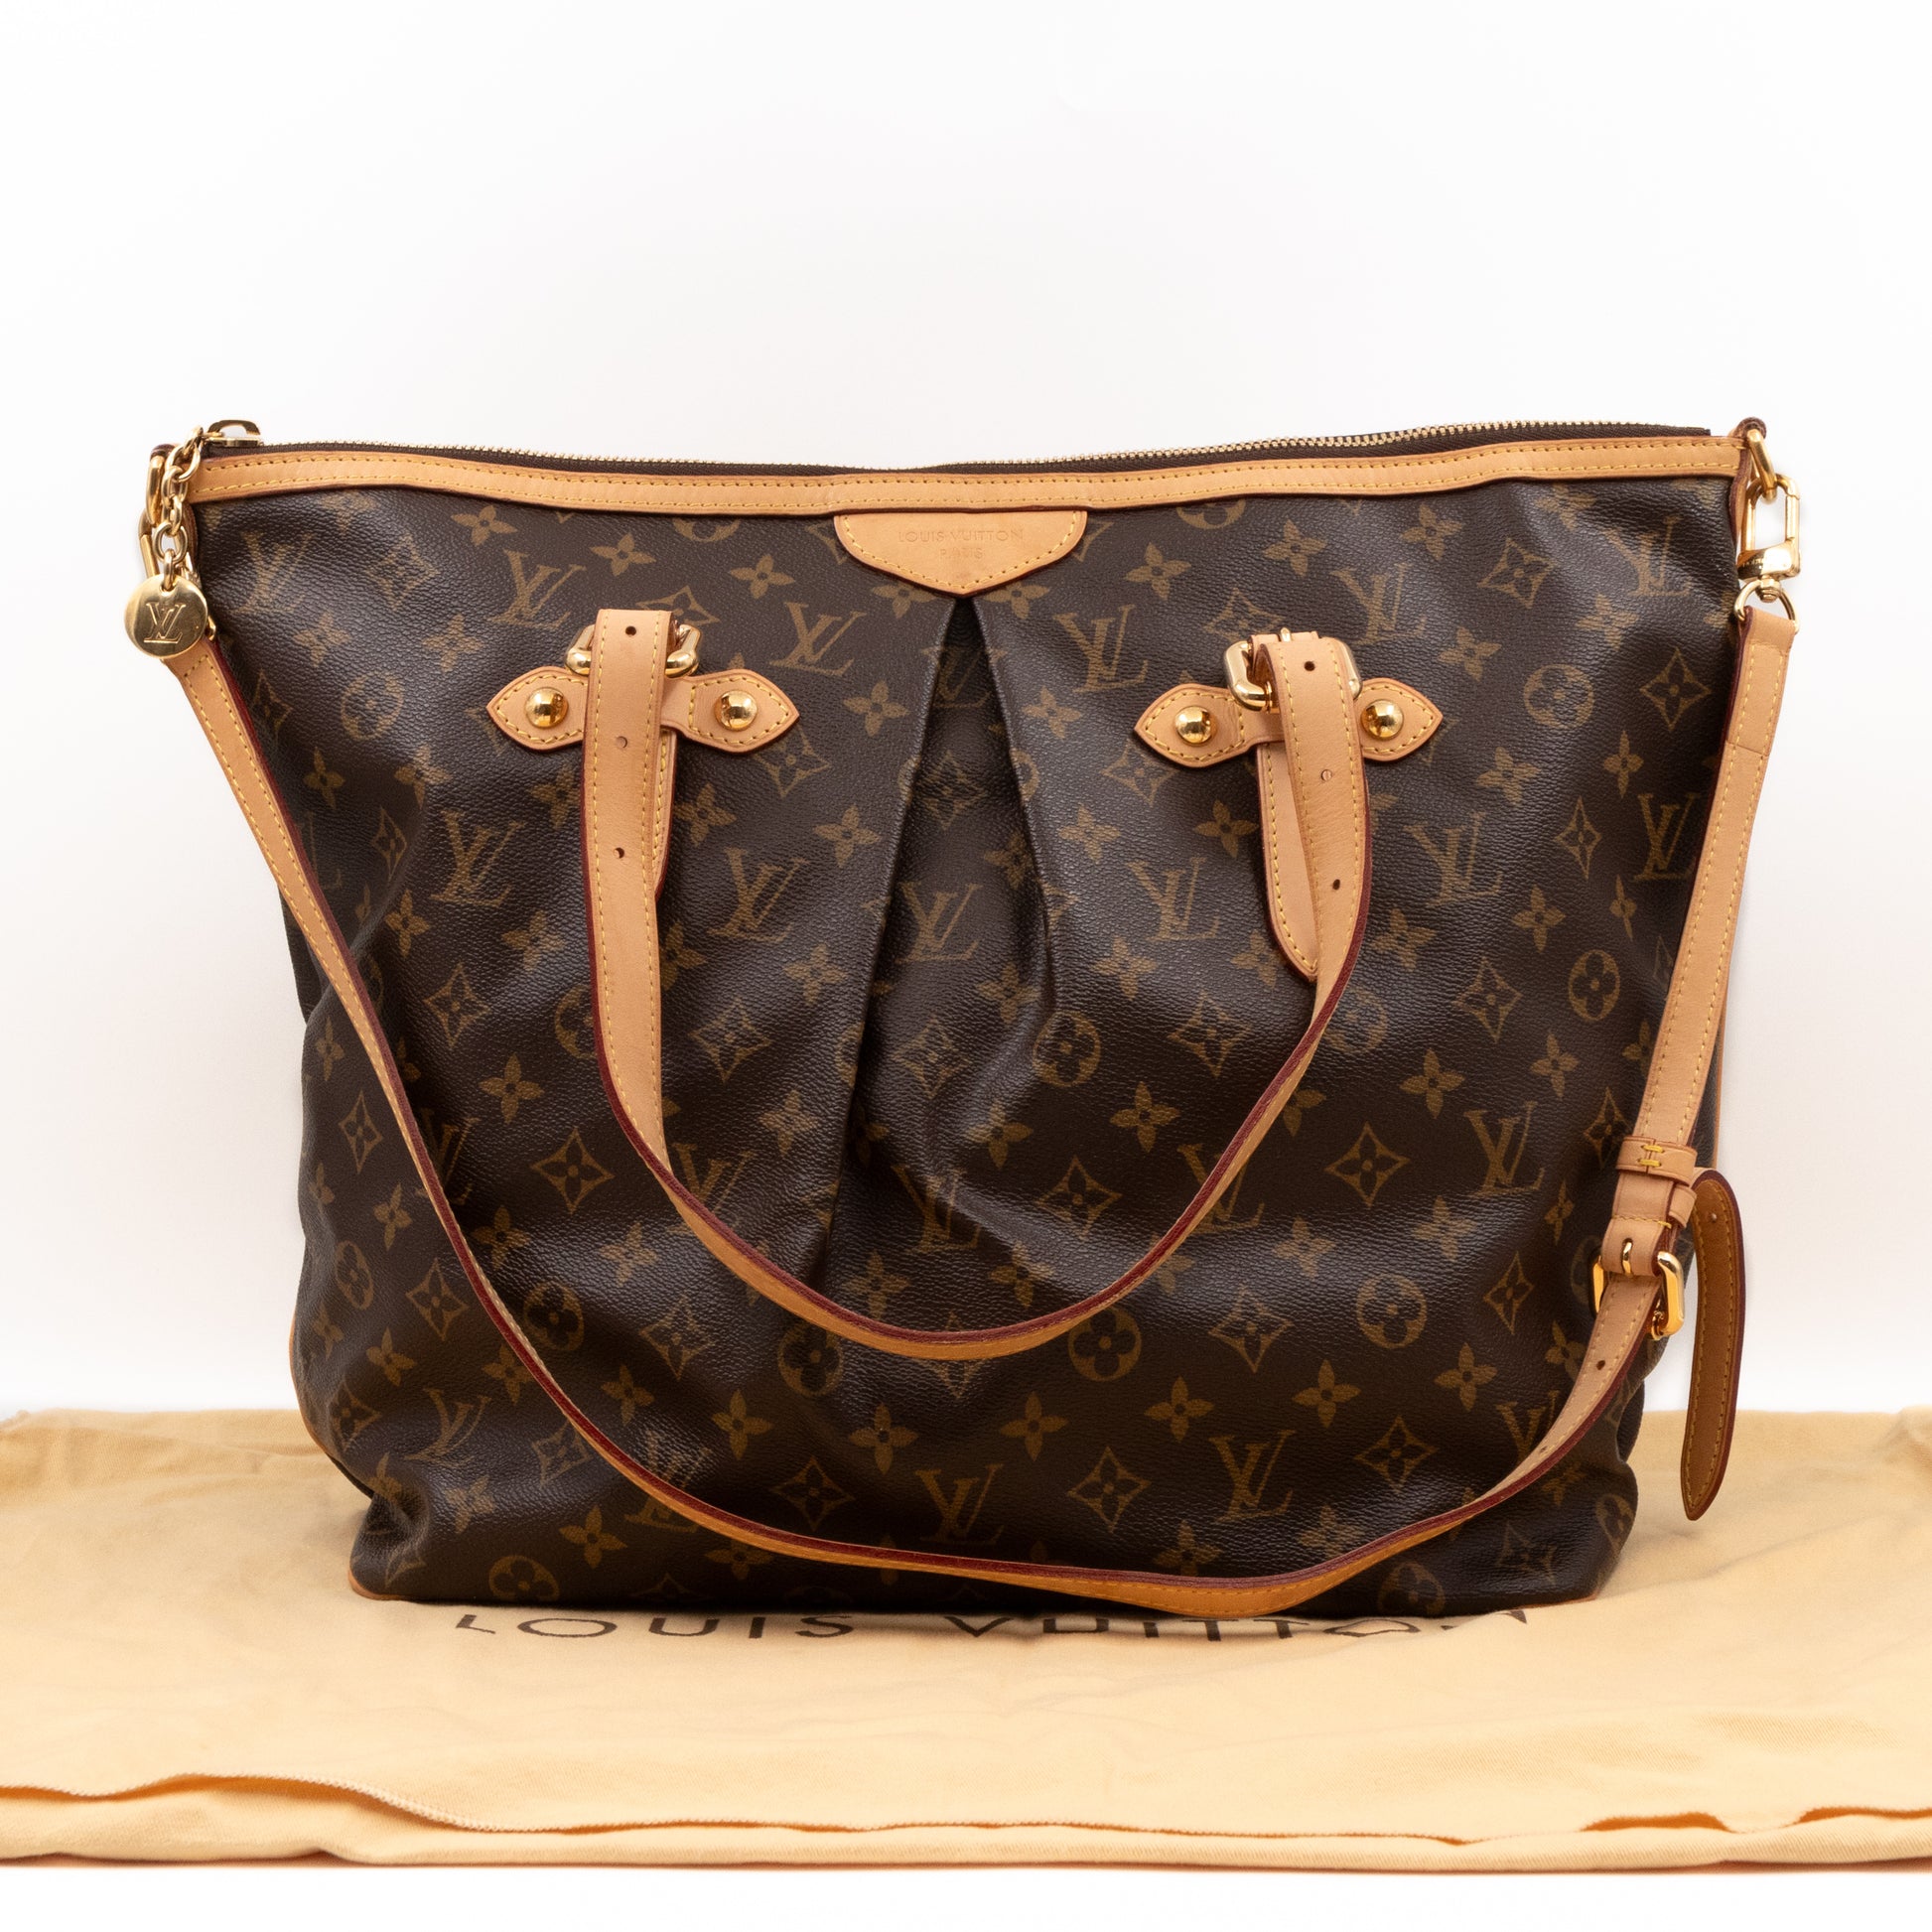 Review: We love the Louis Vuitton Palermo (discontinued but not